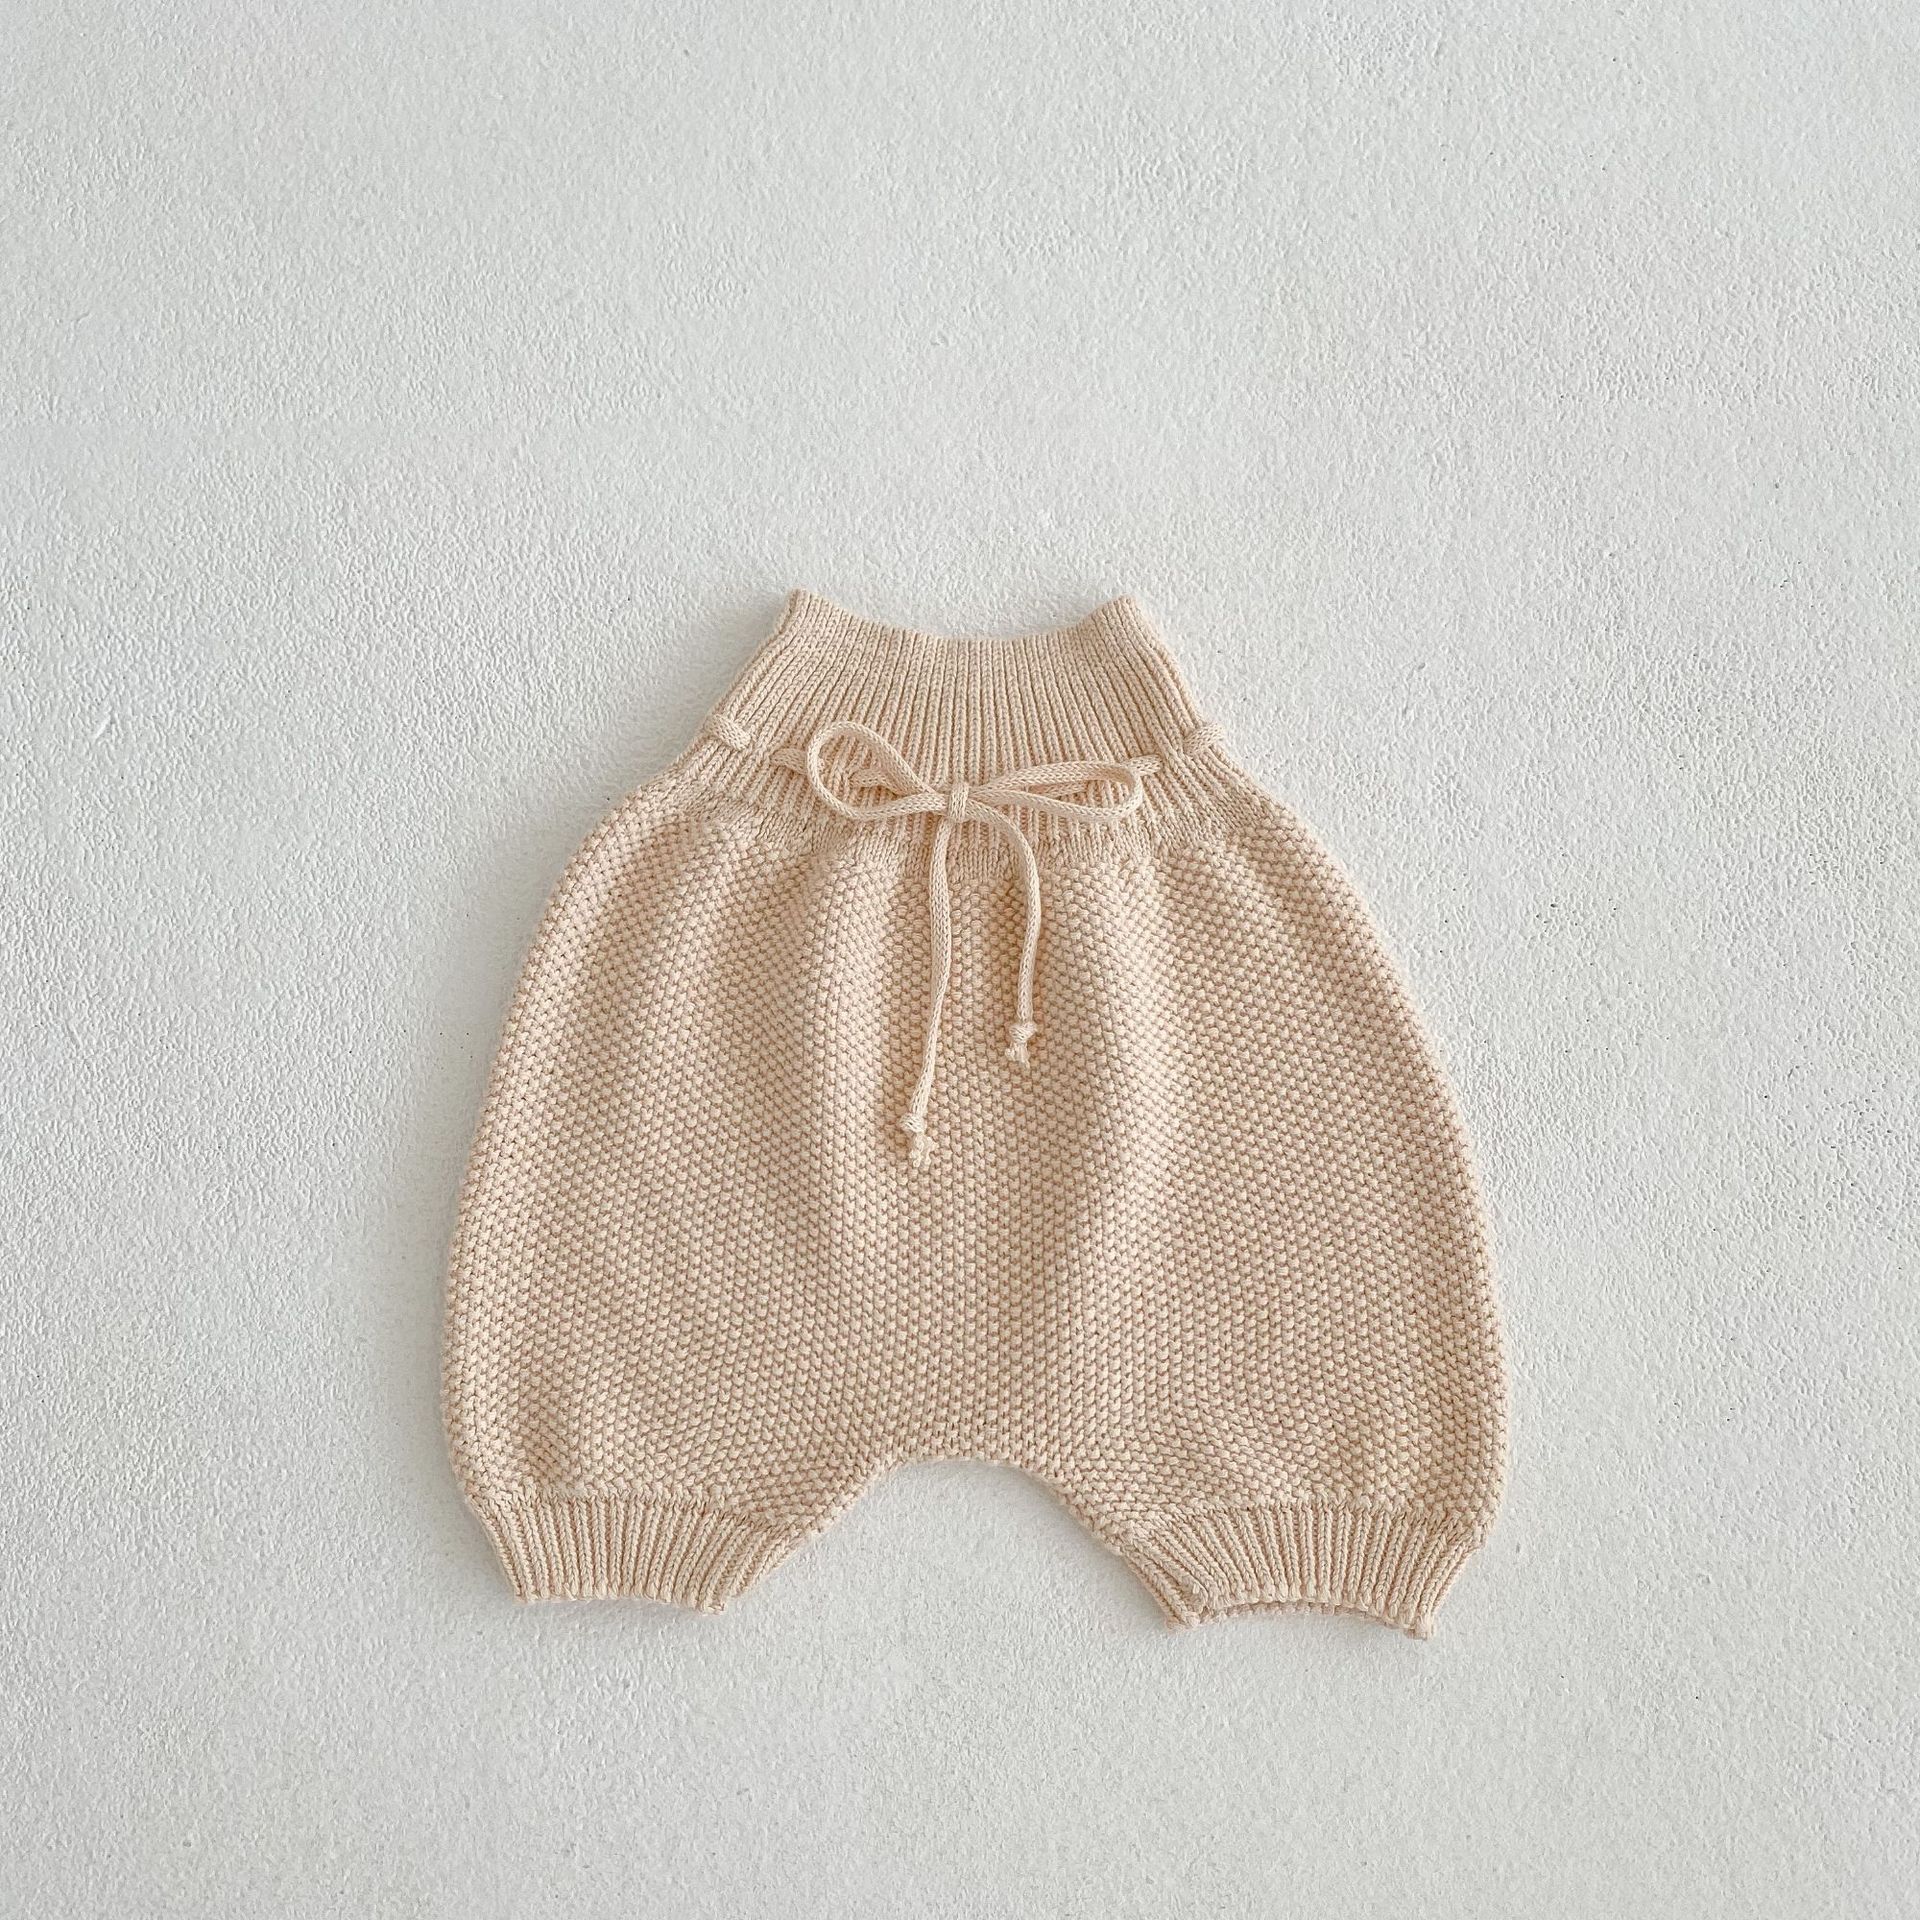 ODM Custom V Neck Single Breasted Baby Oversized Summer Shorts And Top Sets lantern Pants Knitted 100 Cotton Baby Clothing Sets